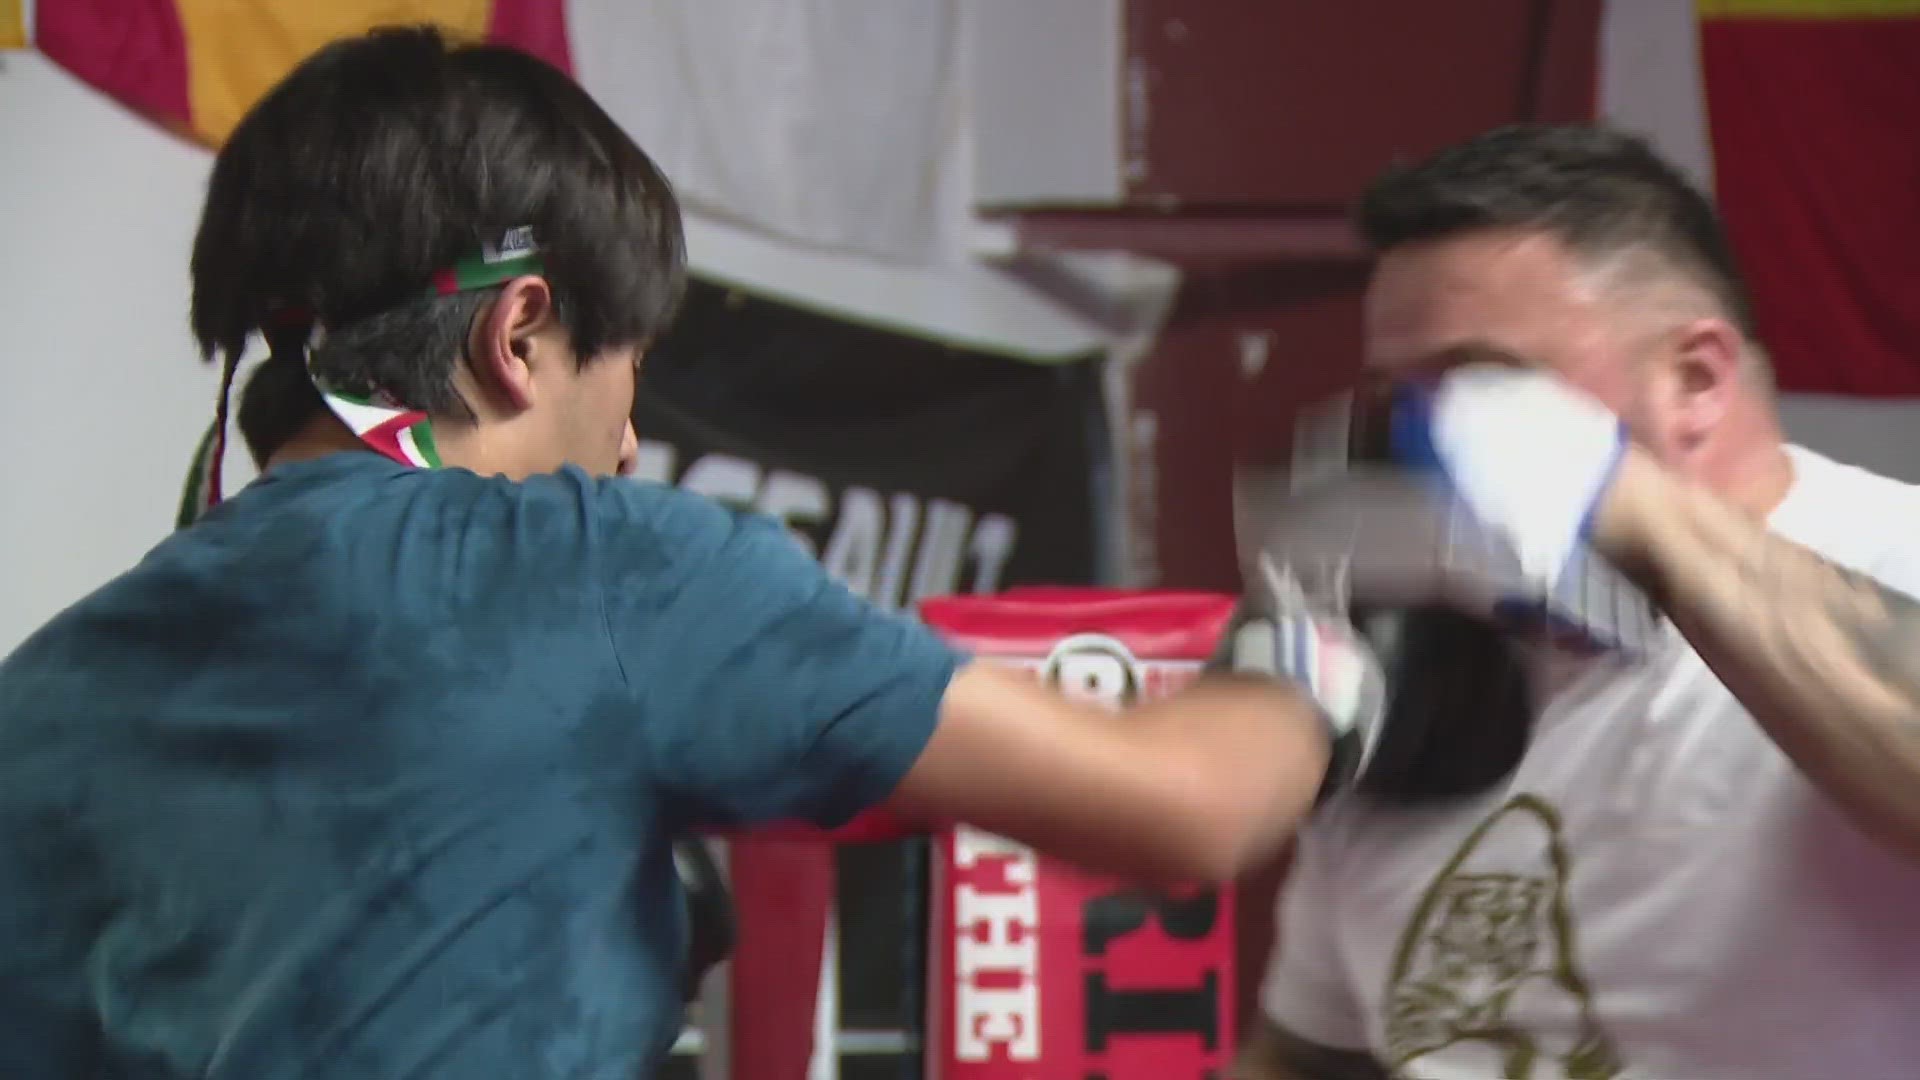 A young Ladue teen juggles his school work while training to become a boxer.